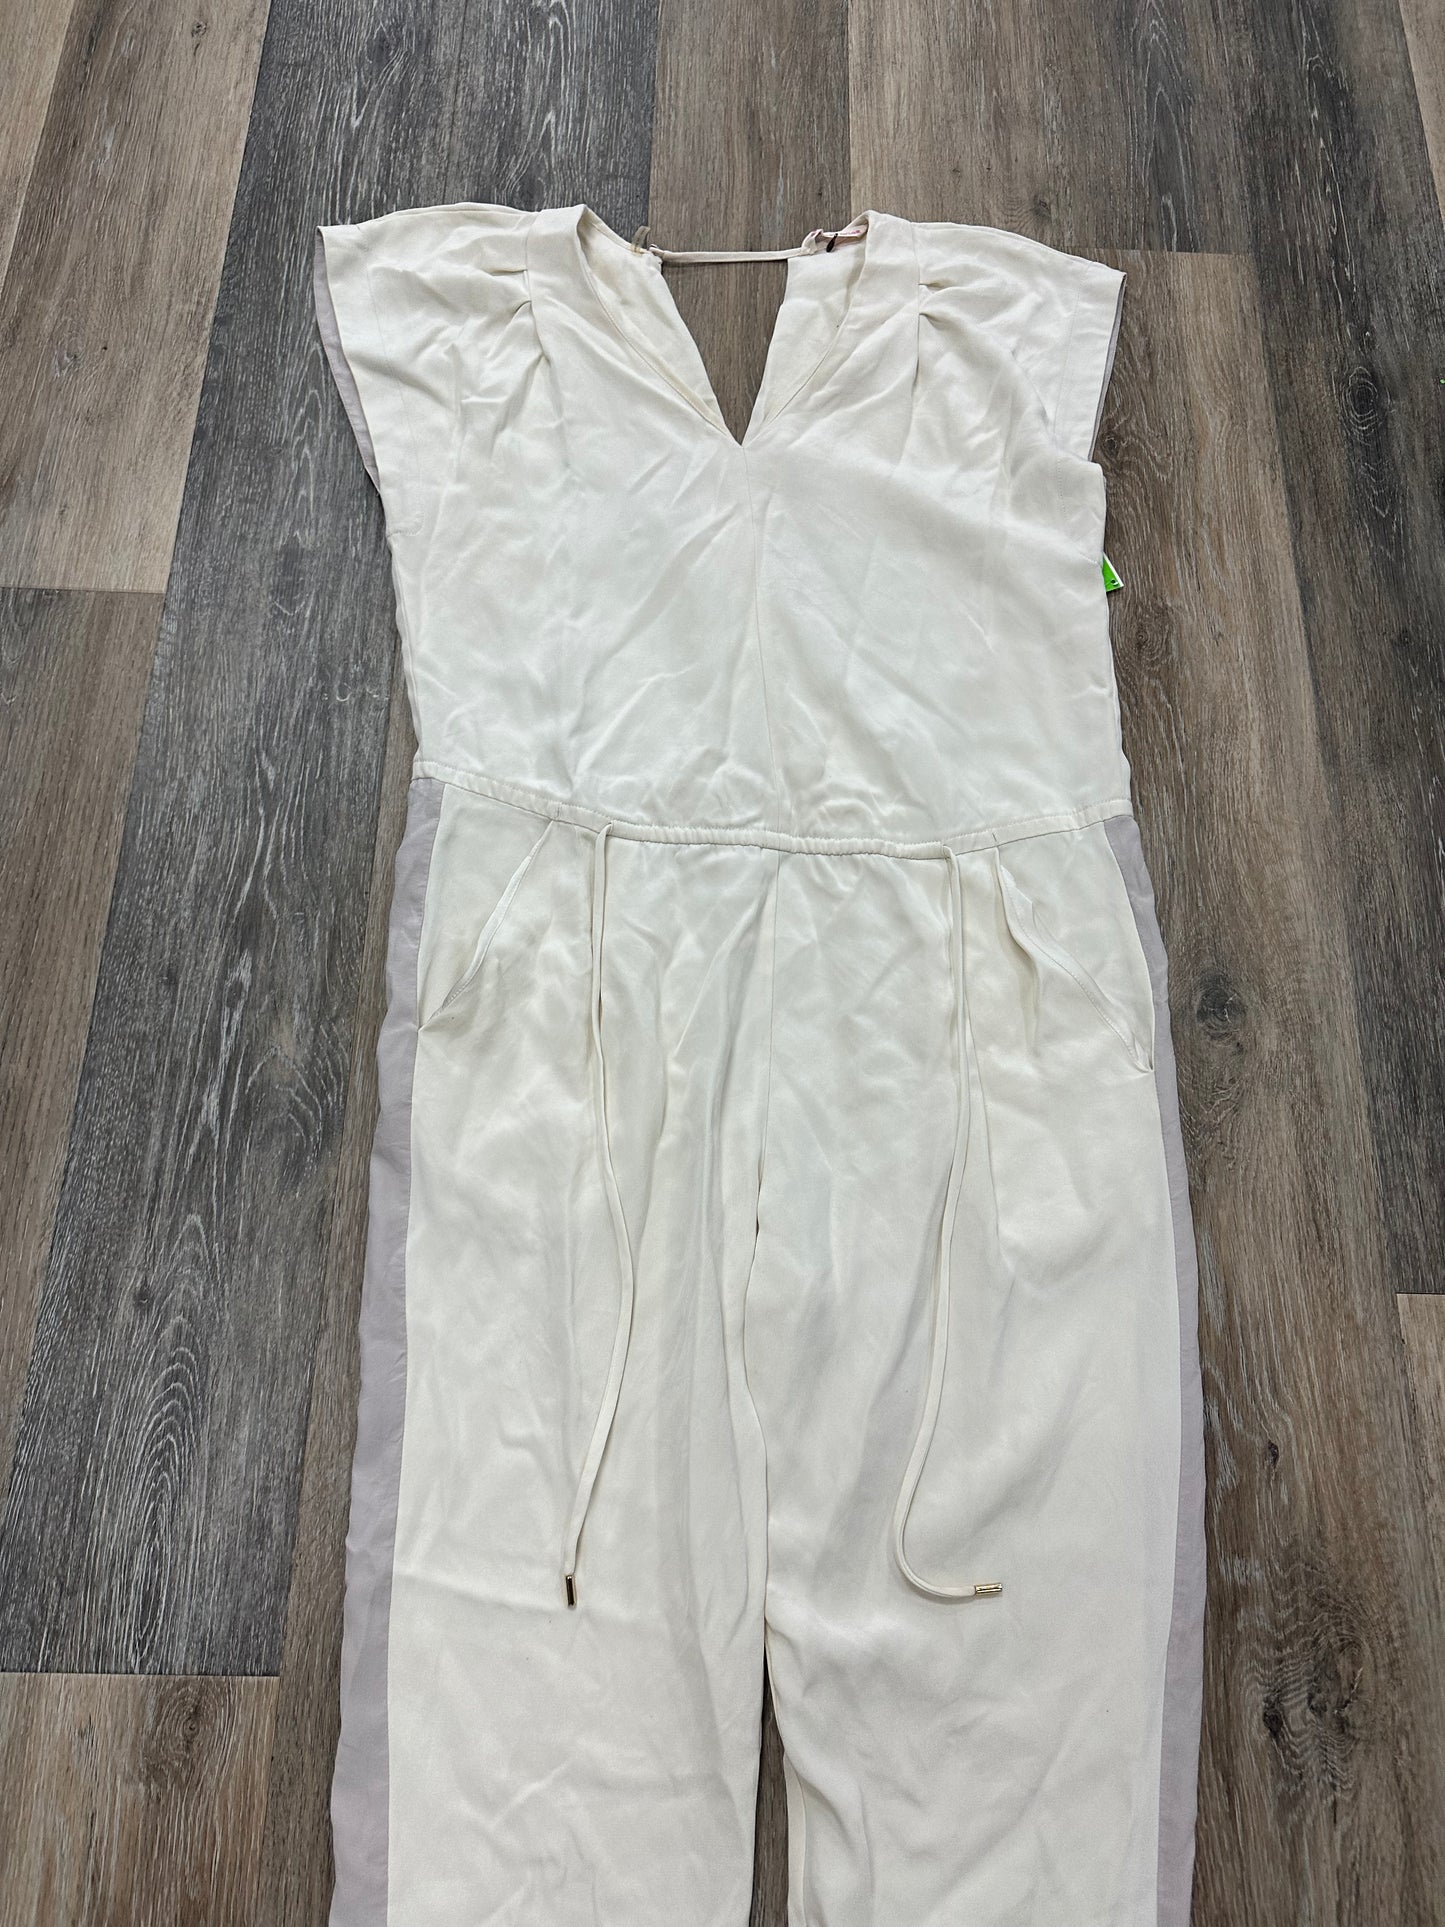 Jumpsuit By Rebecca Taylor  Size: 8